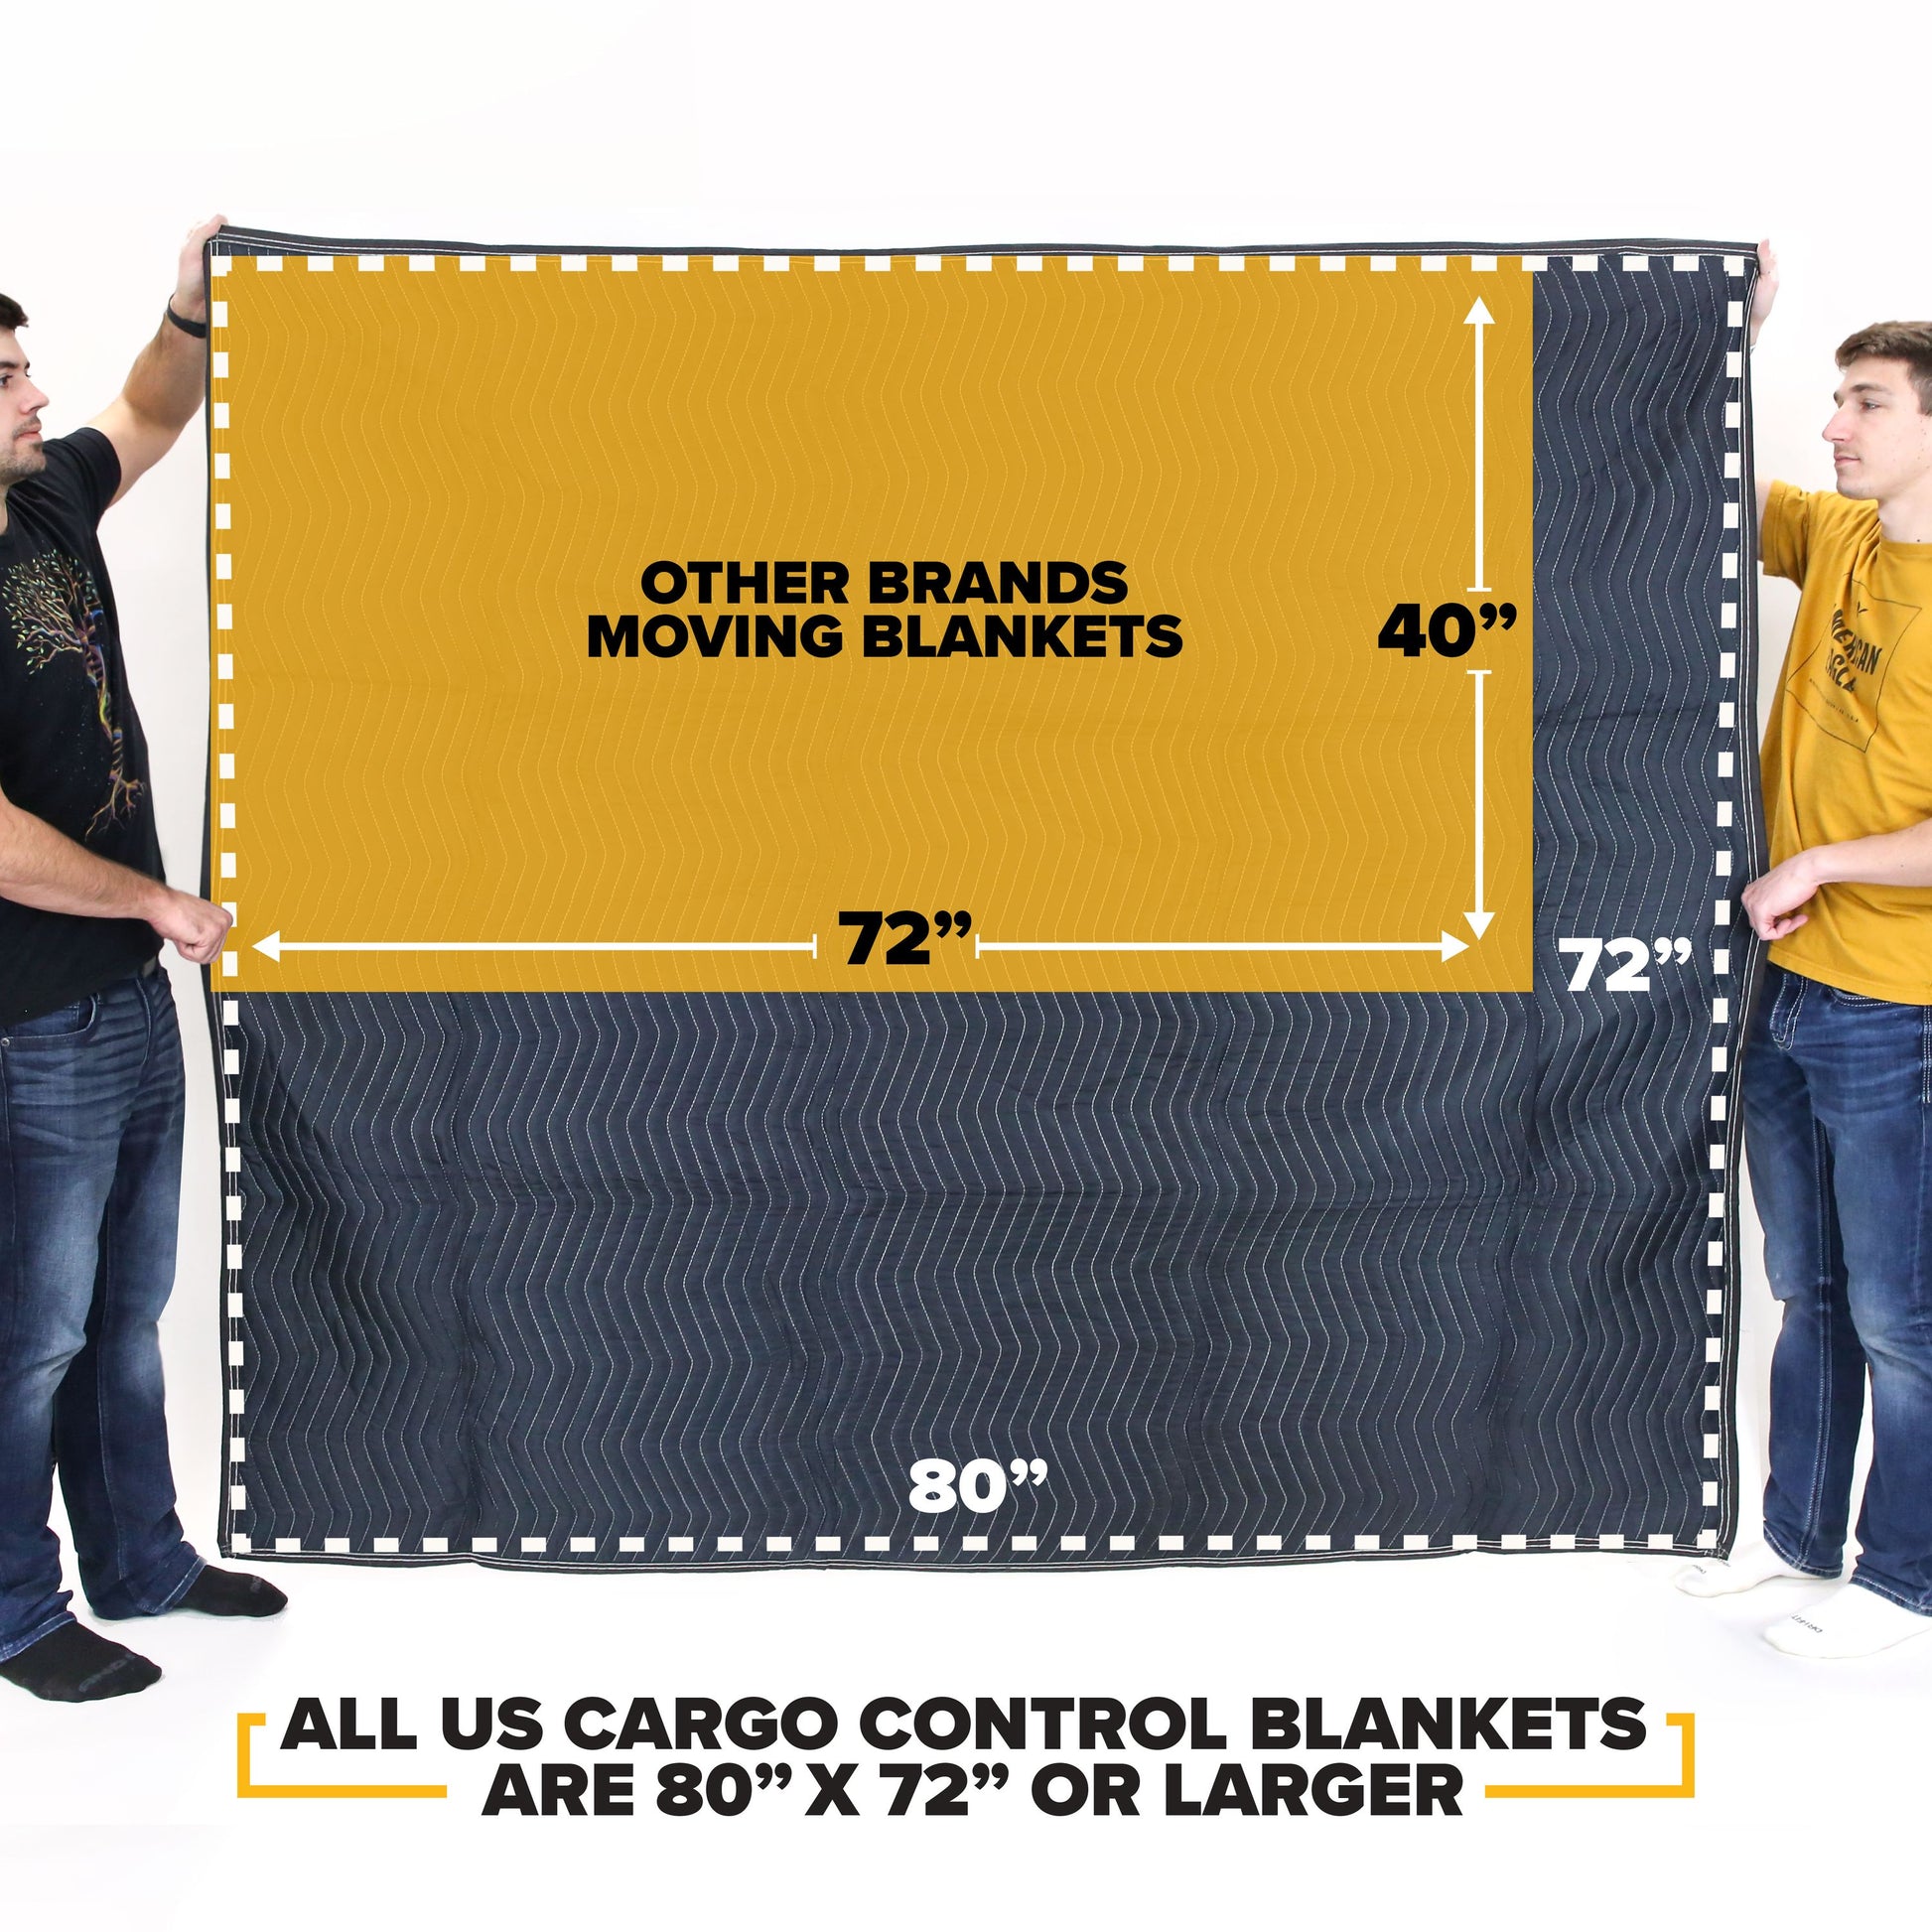 Moving Blankets - Preferred Mover 4 Pack image 4 of 11